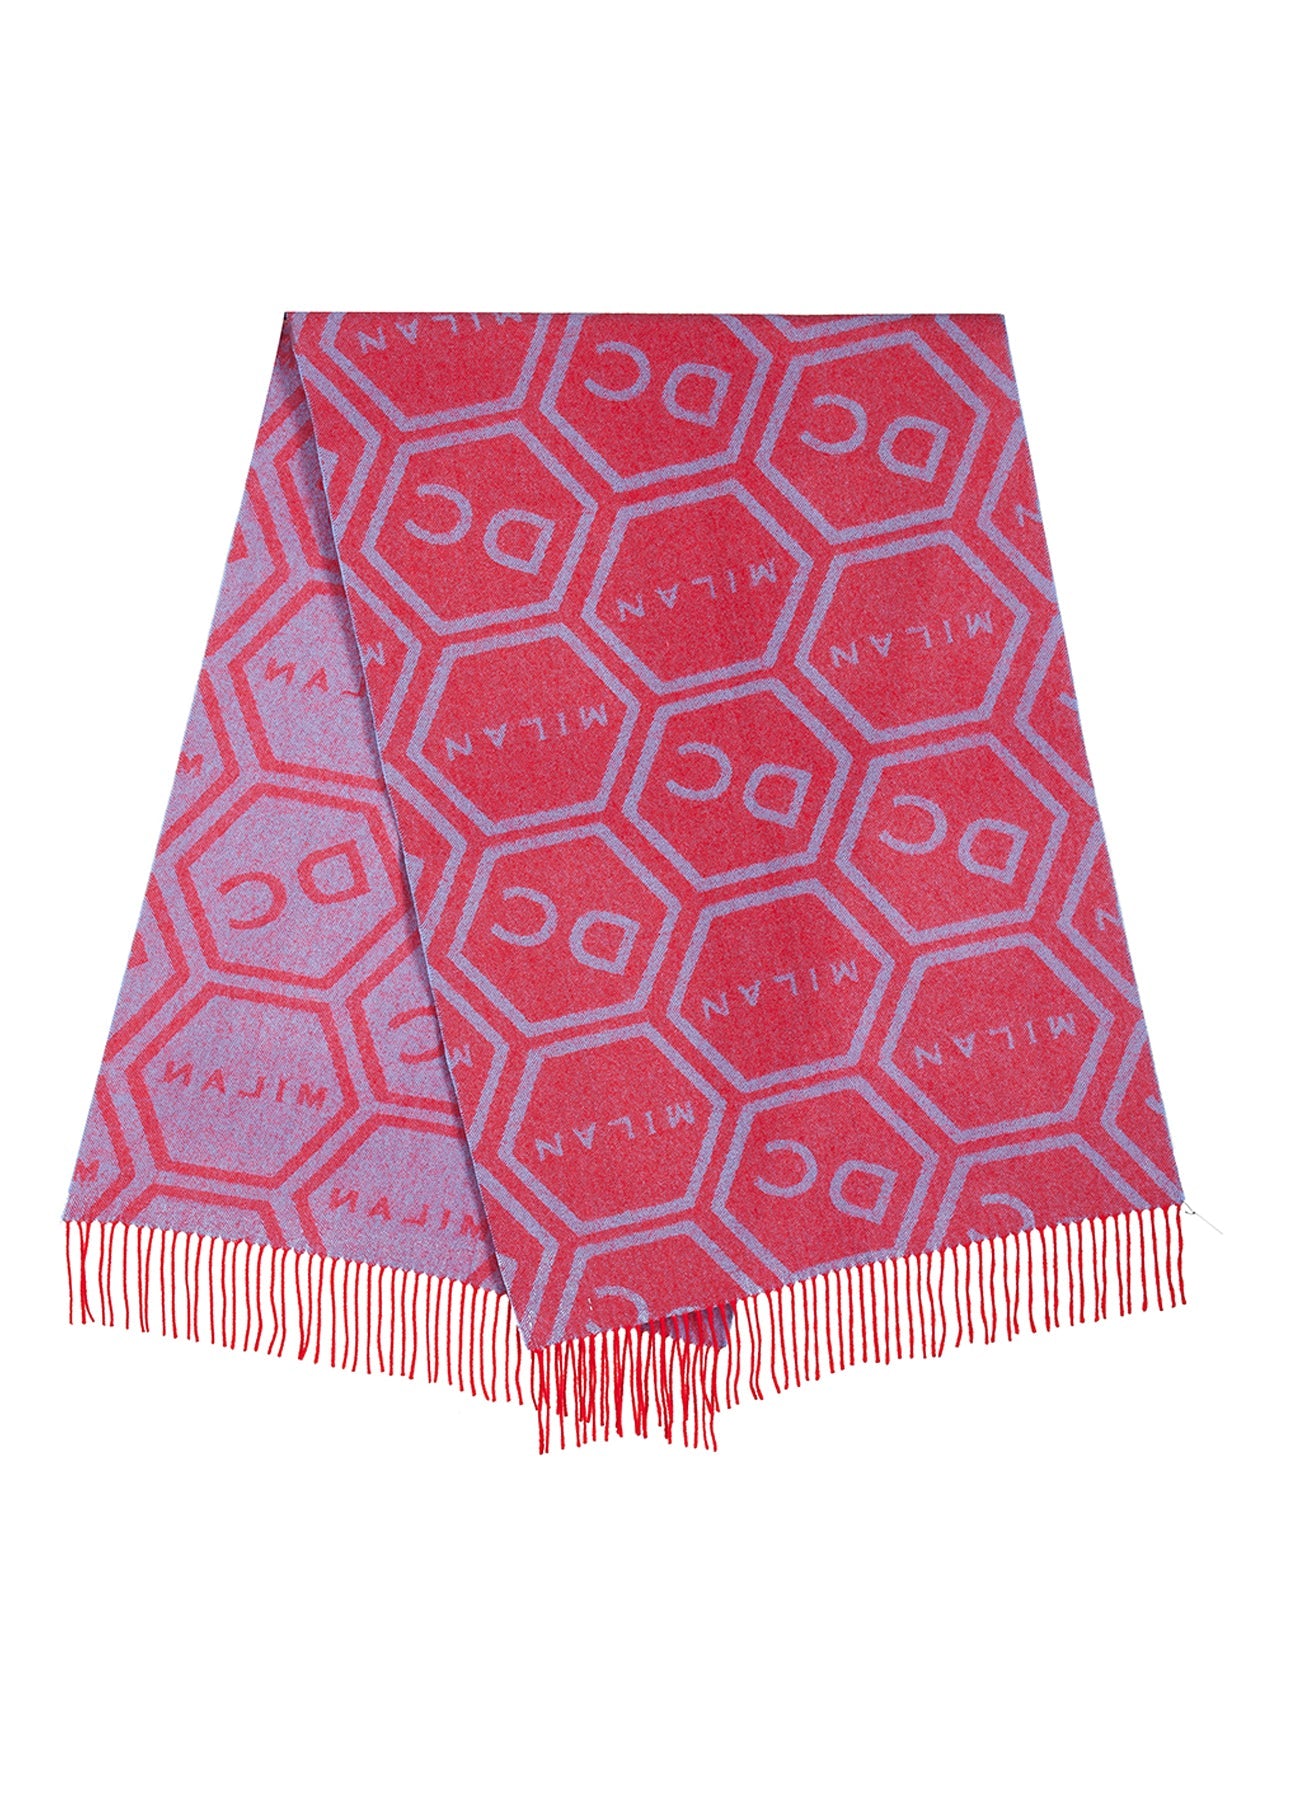 DC Monogram Red Stole 100% Pure Lambswool